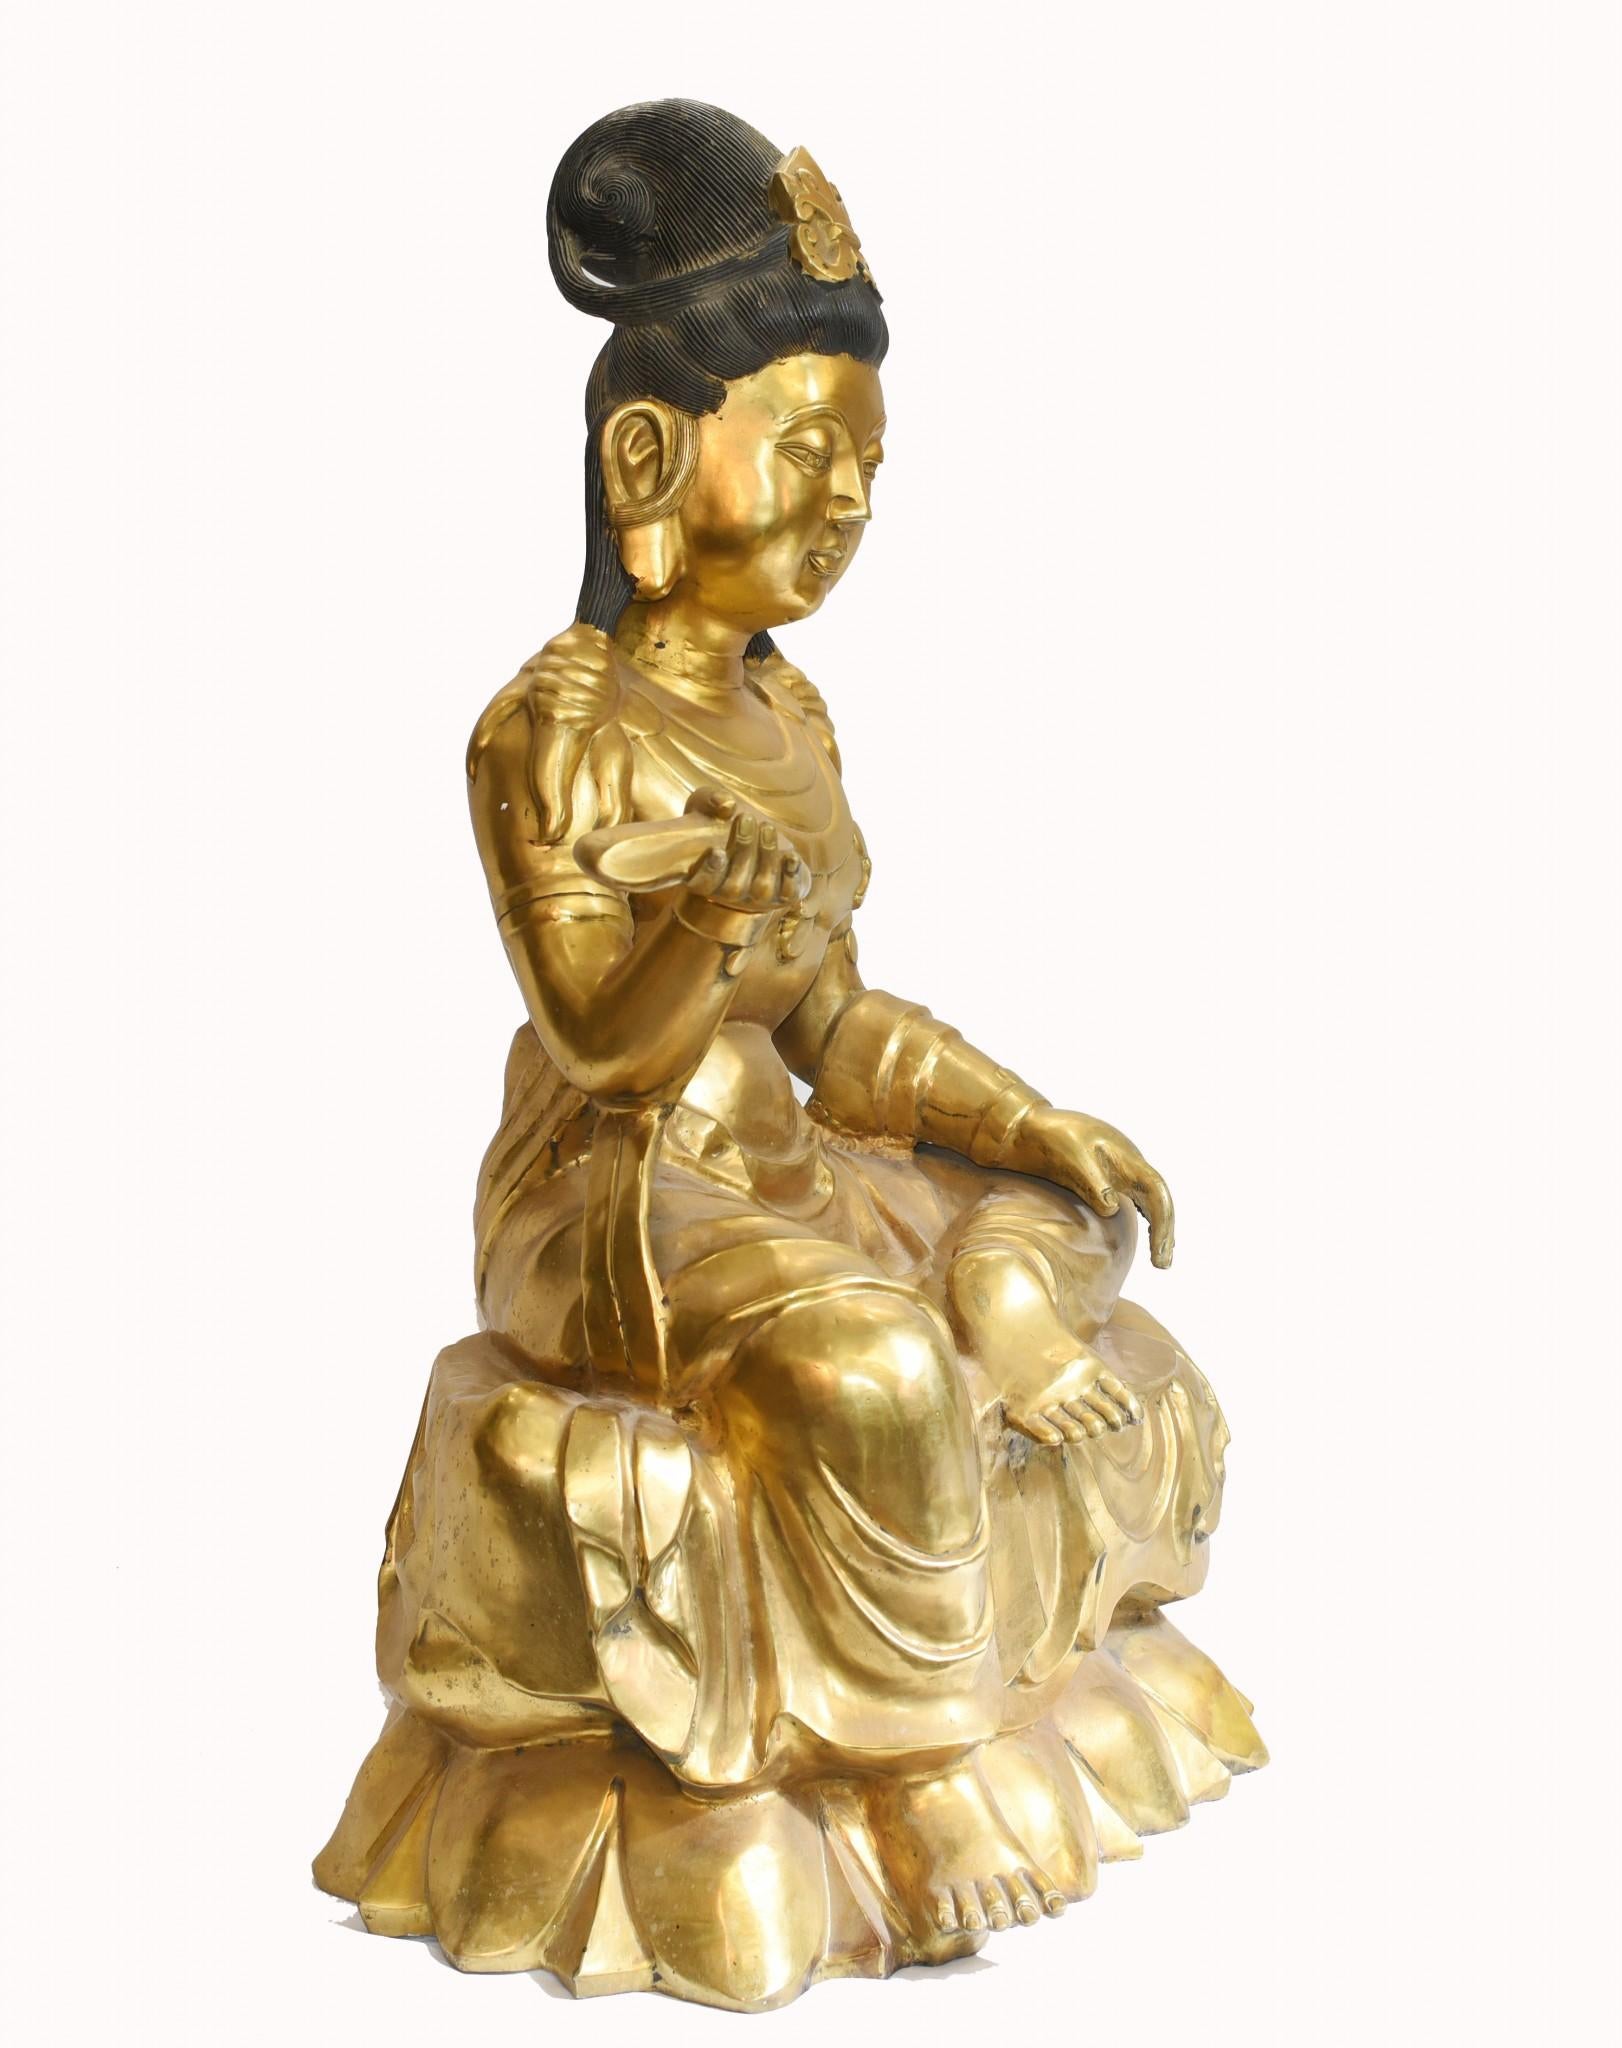 Seated Golden Buddha Statue Nepalese Meditation Bronze Sculpture For Sale 3